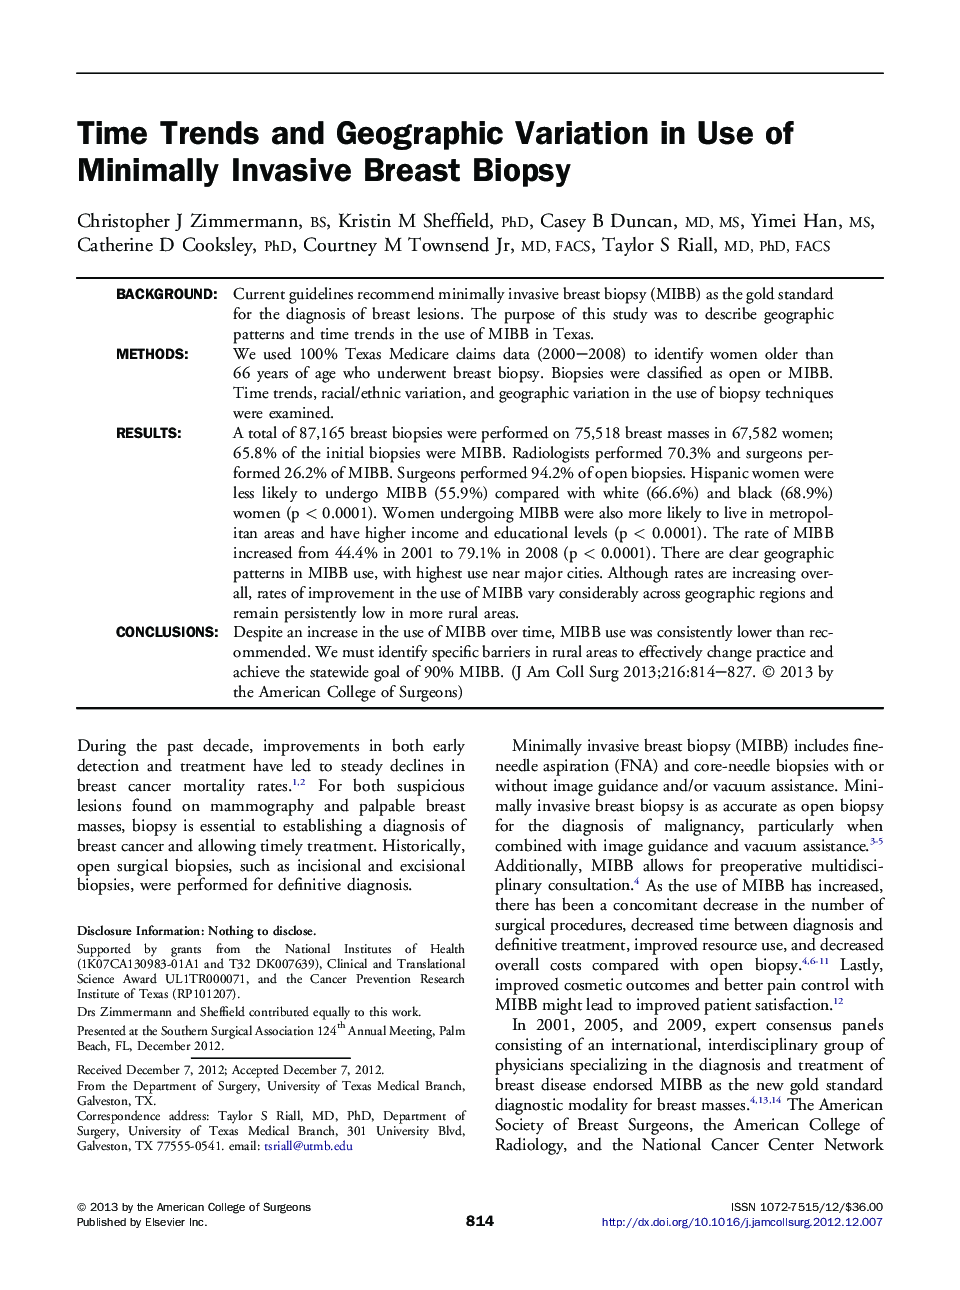 Time Trends and Geographic Variation in Use of Minimally Invasive Breast Biopsy 